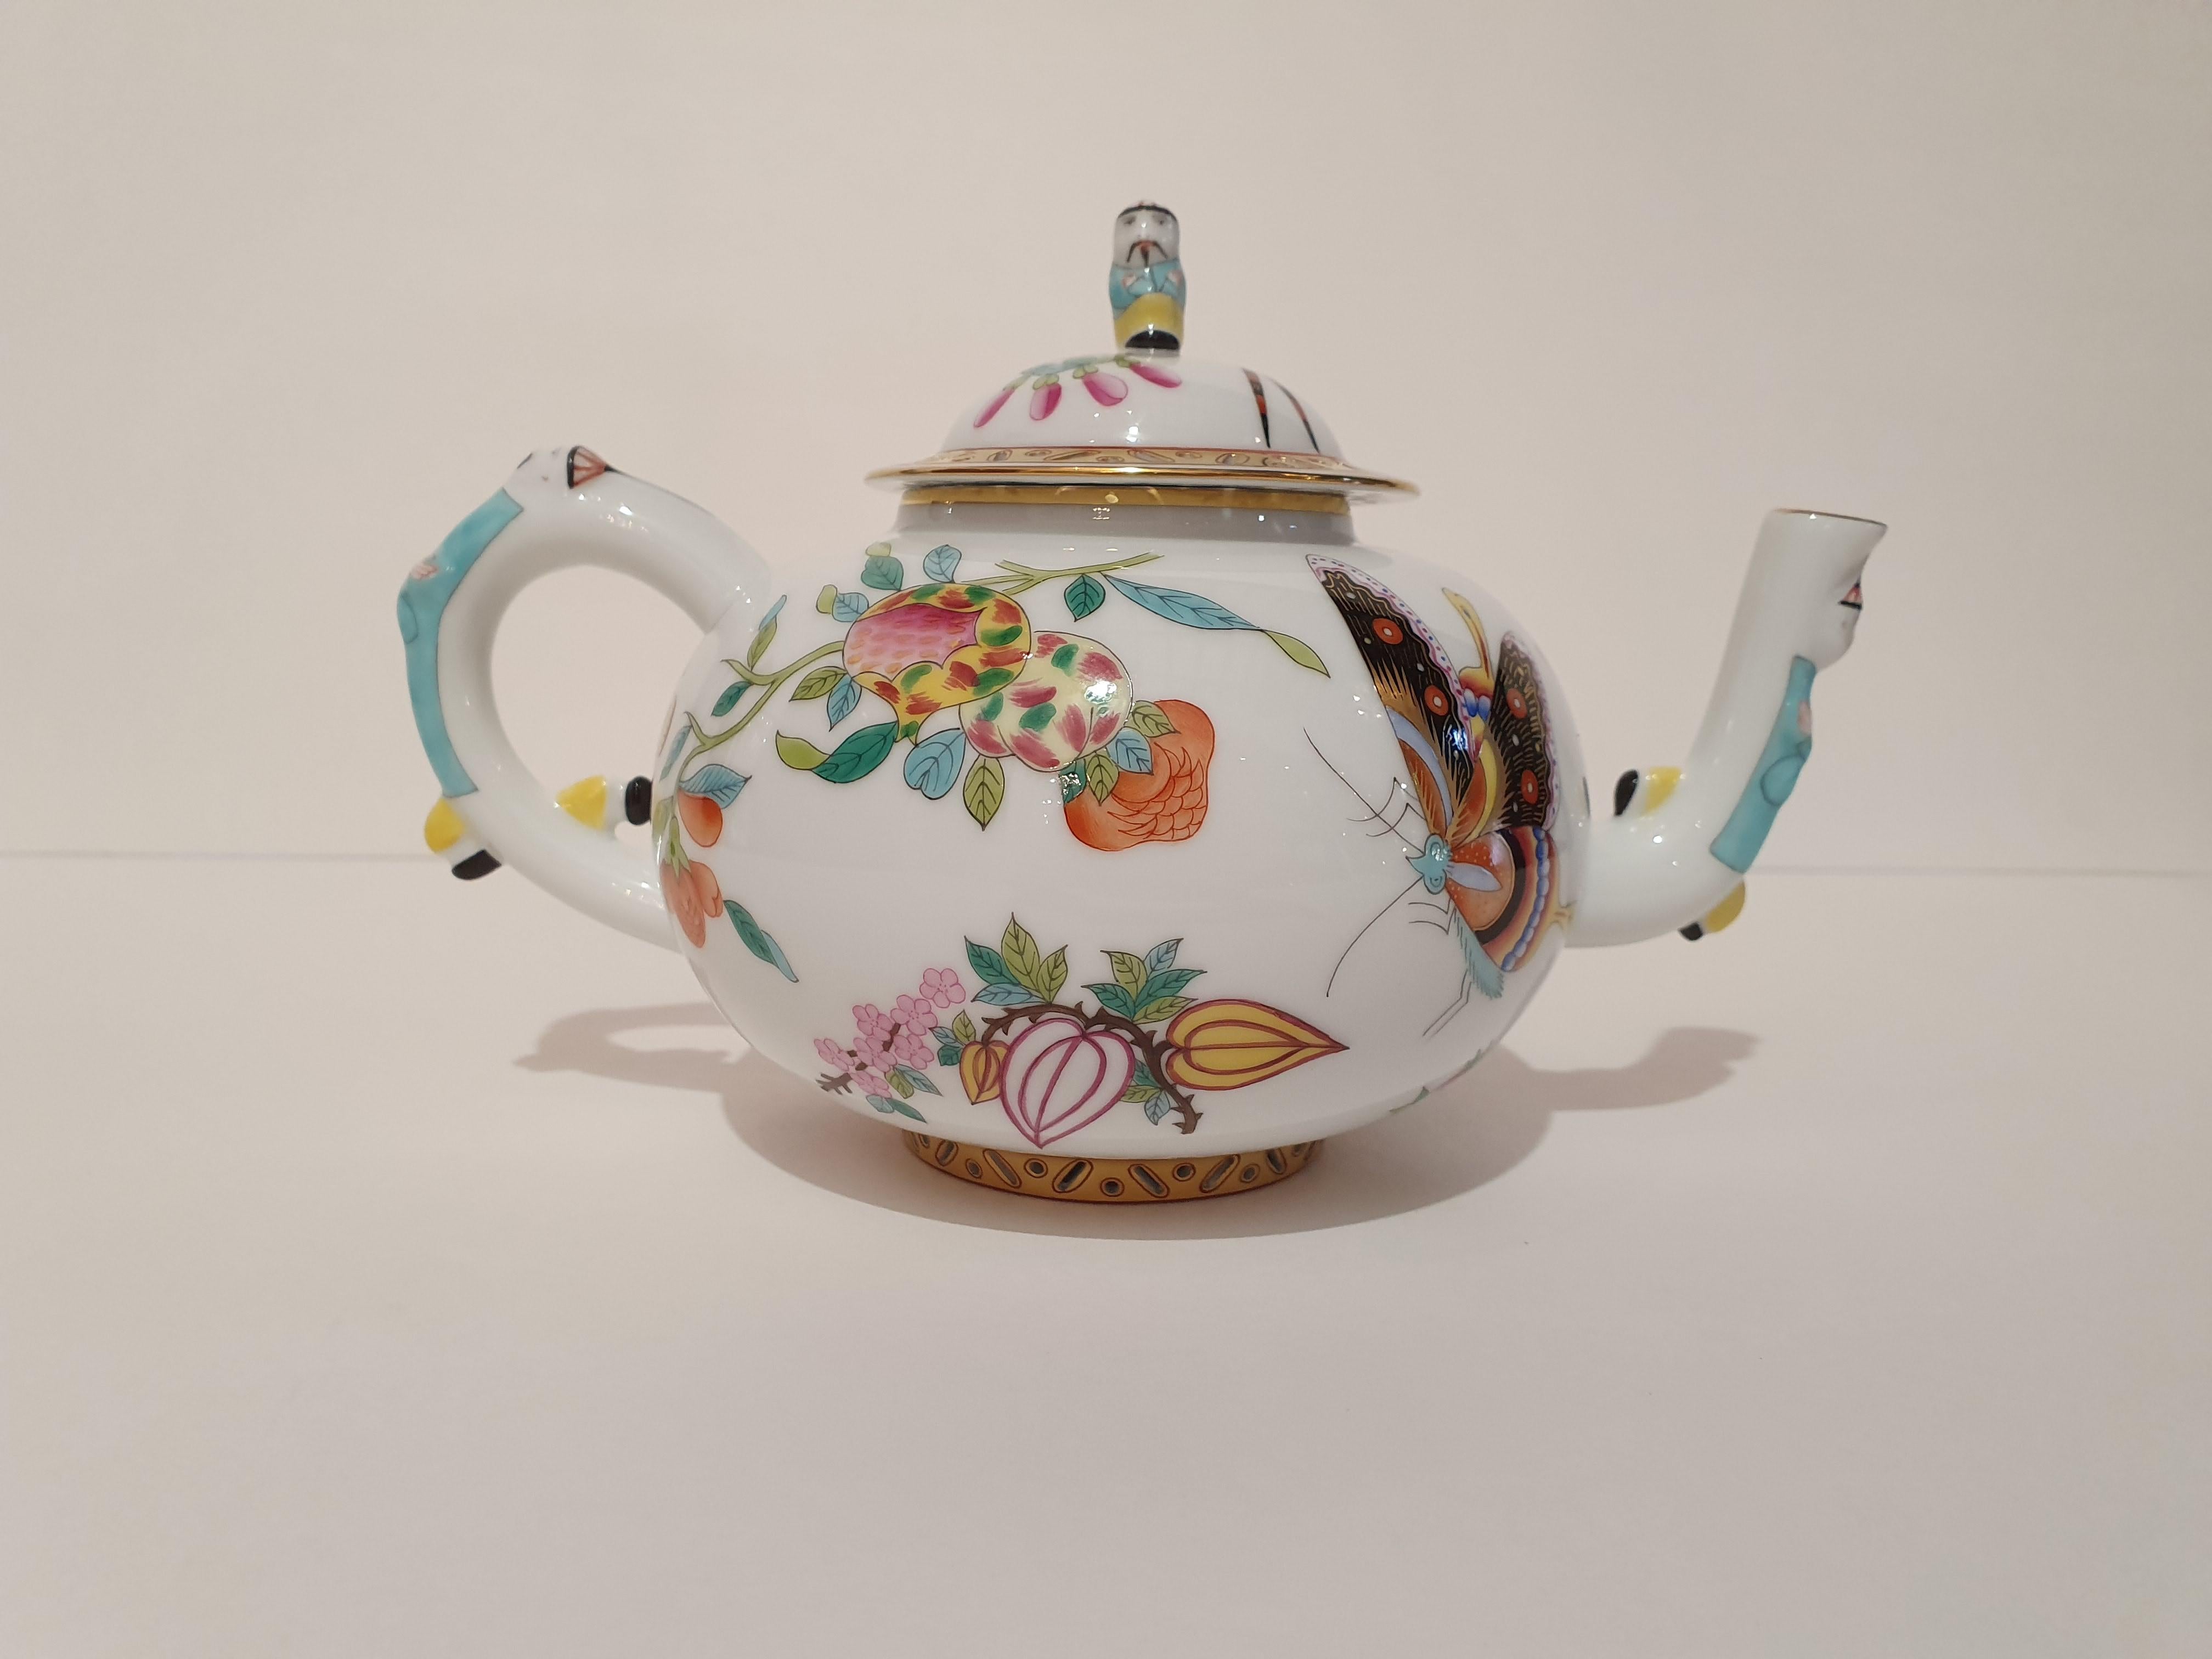 The first is hand painted by master decorator Erzsebet Rakoczy.
The splendid oriental painterly decor with flowers, birds and butterflies is perfectly combined with the Classic Esterházy shape, note the lace-like fretworks on porcelain at the base